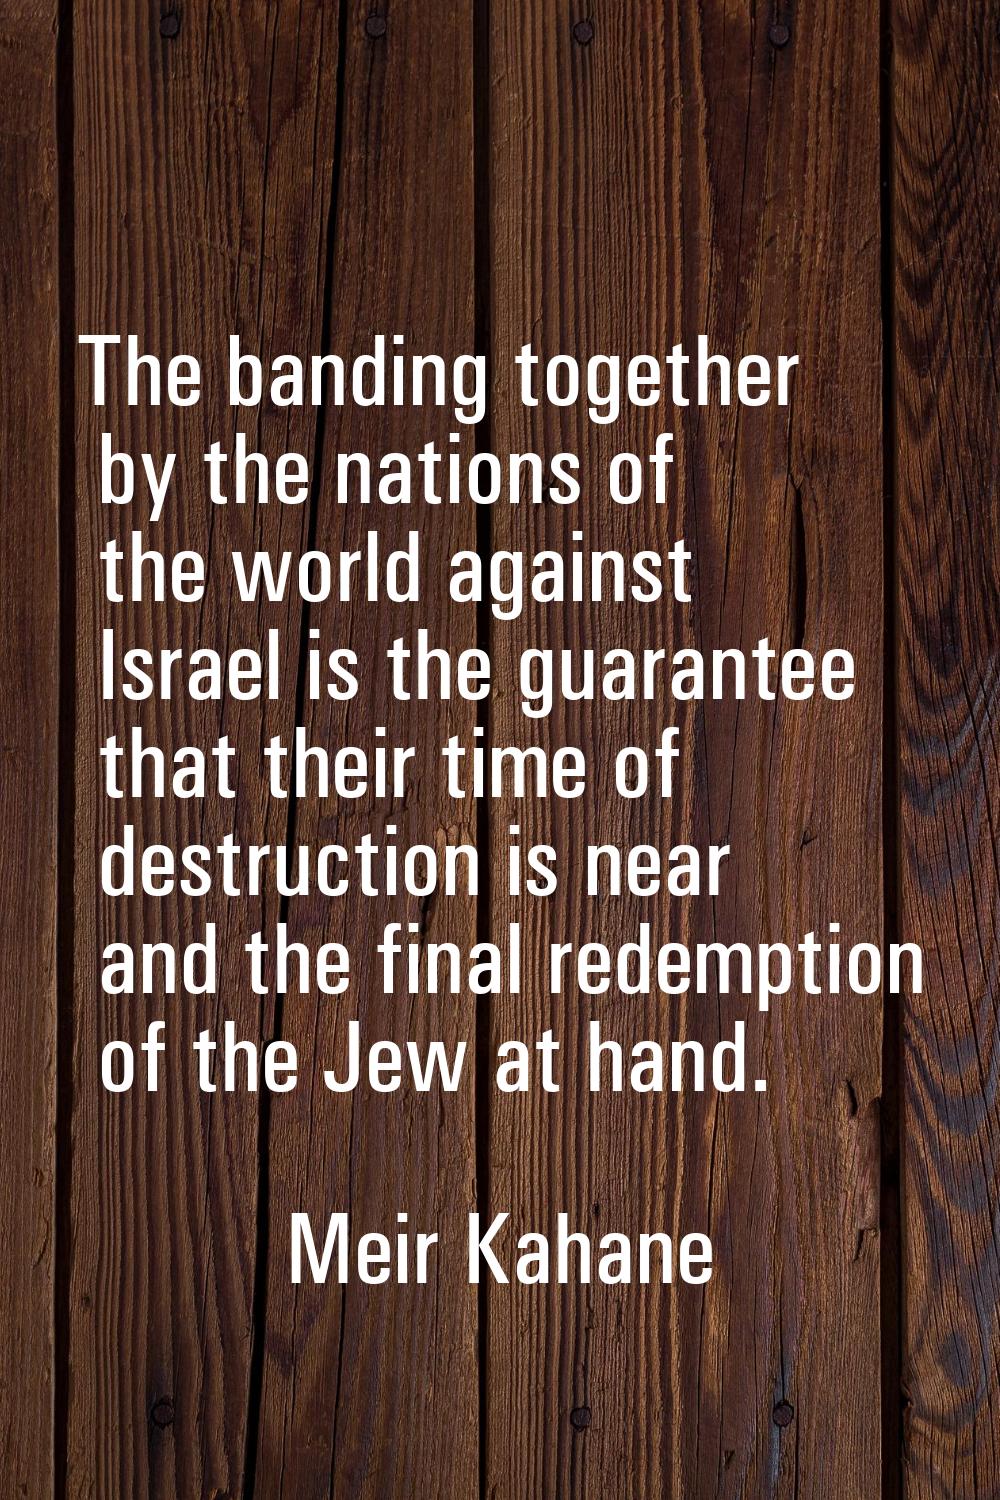 The banding together by the nations of the world against Israel is the guarantee that their time of